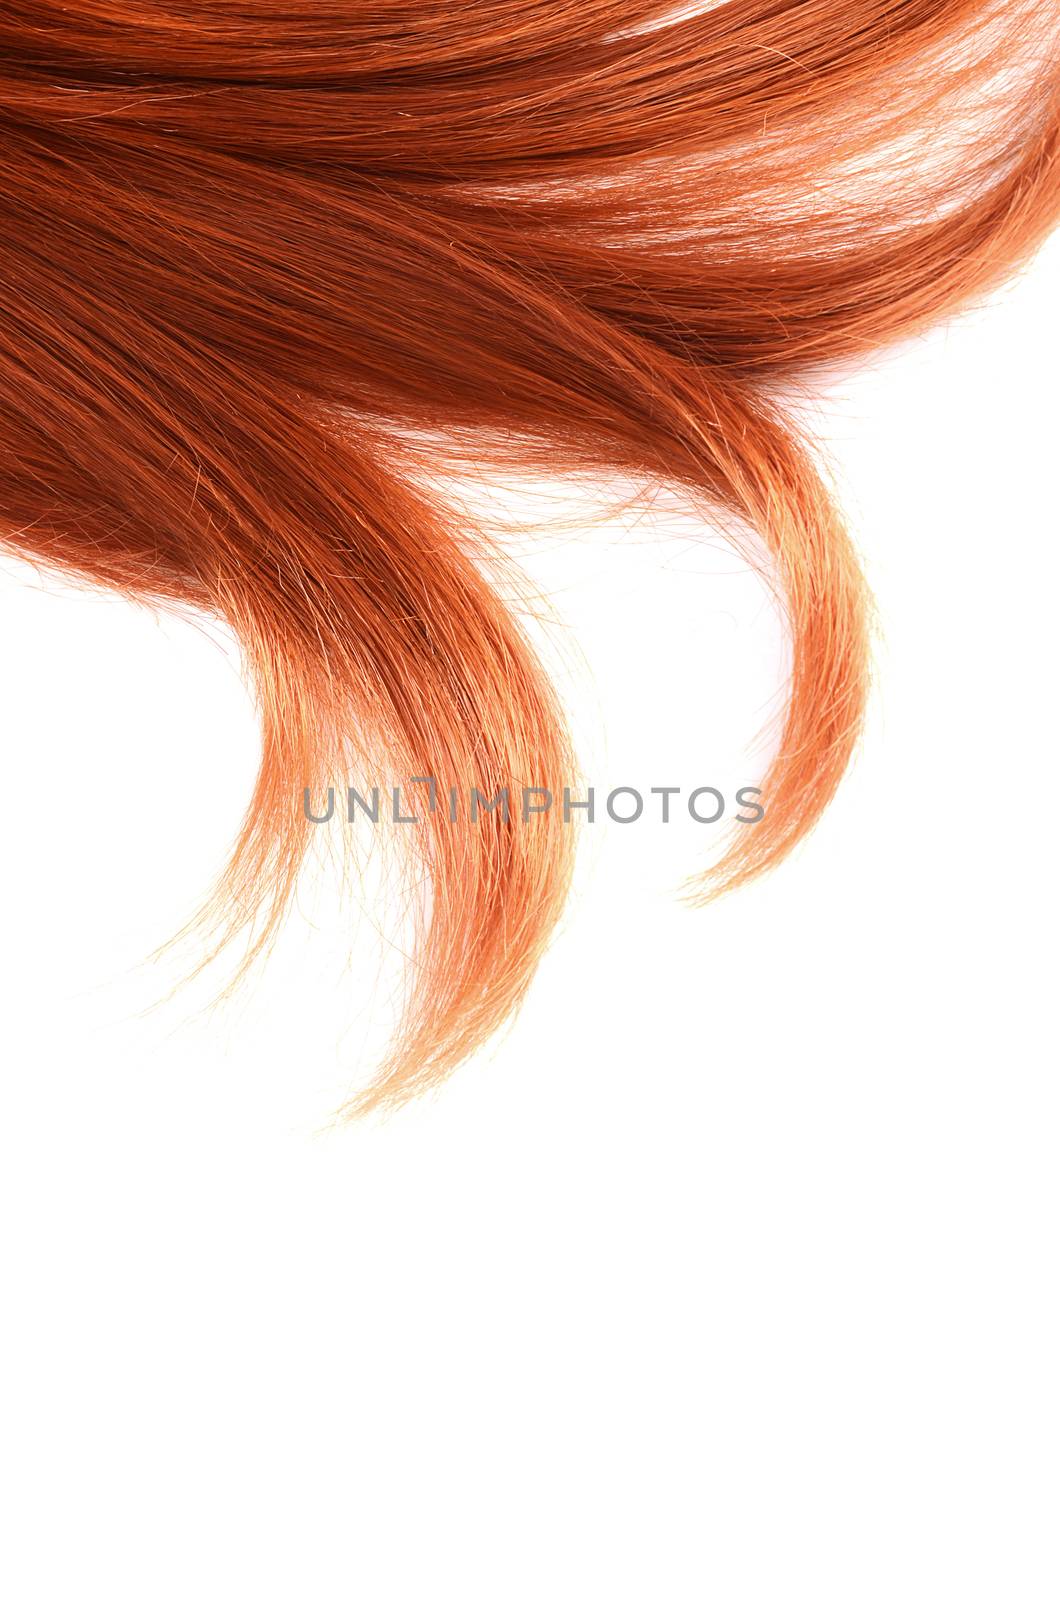 The red hair isolated on white background